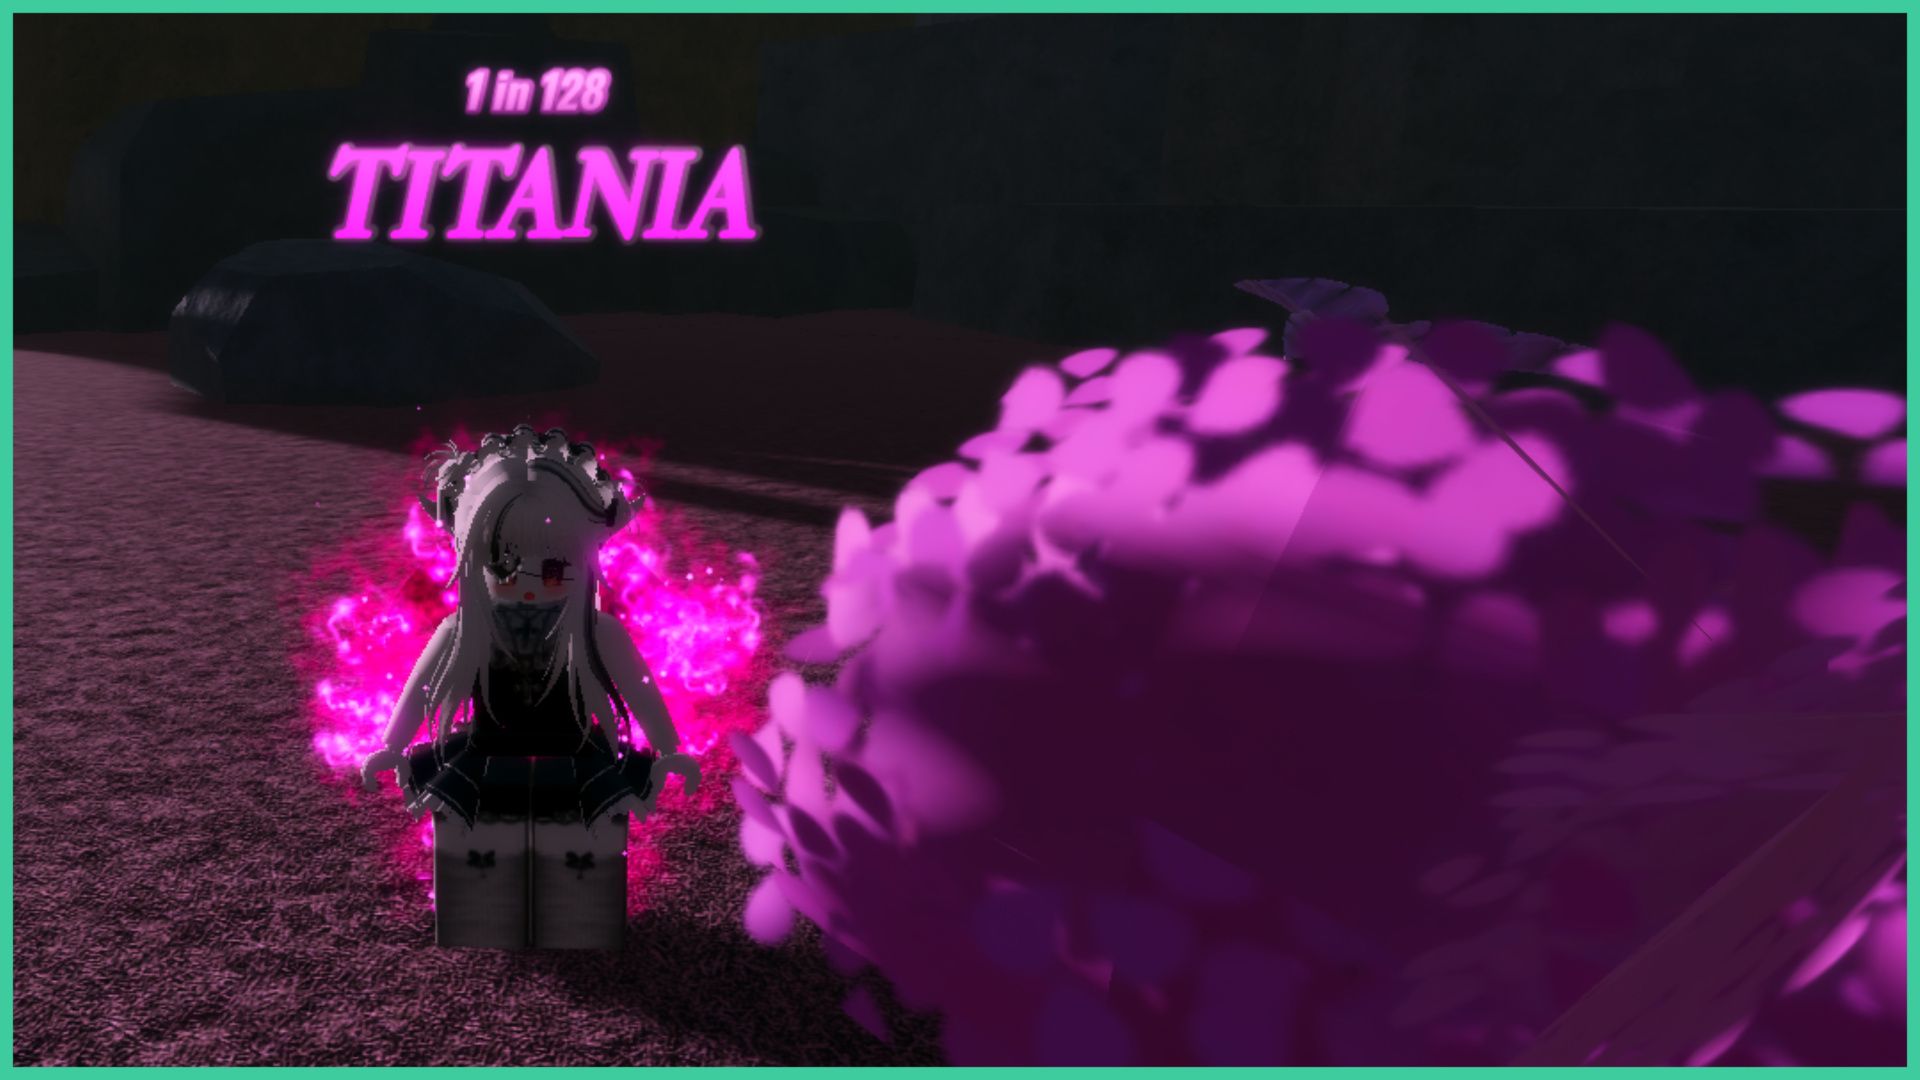 feature image for our anime roulette auras guide, the image was taken during the sakura day time event as the player stands next to a pink sakura bush as they wear the titania aura that surrounds the player in pink flames